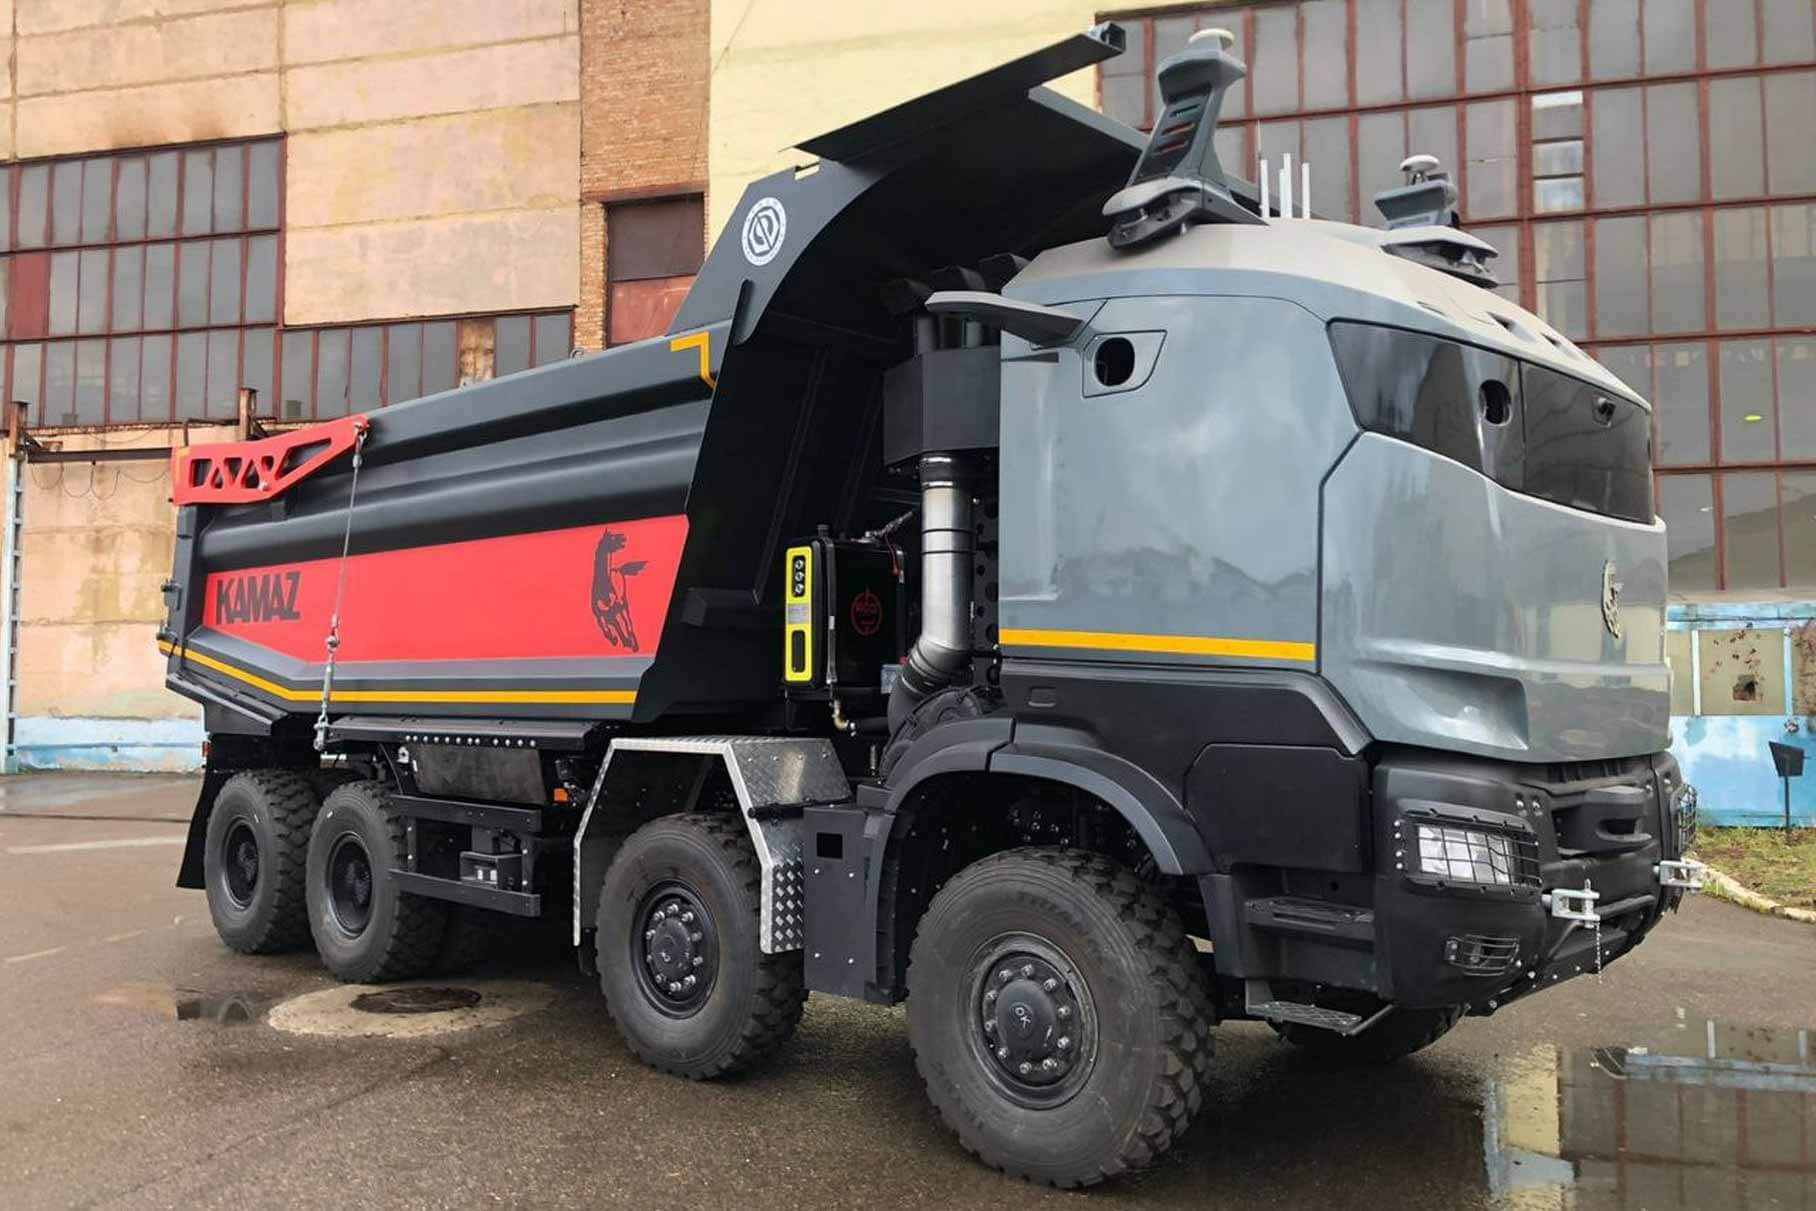 The newest KamAZ dump truck “Robocop” turned out to be stuffed with “sanctions”